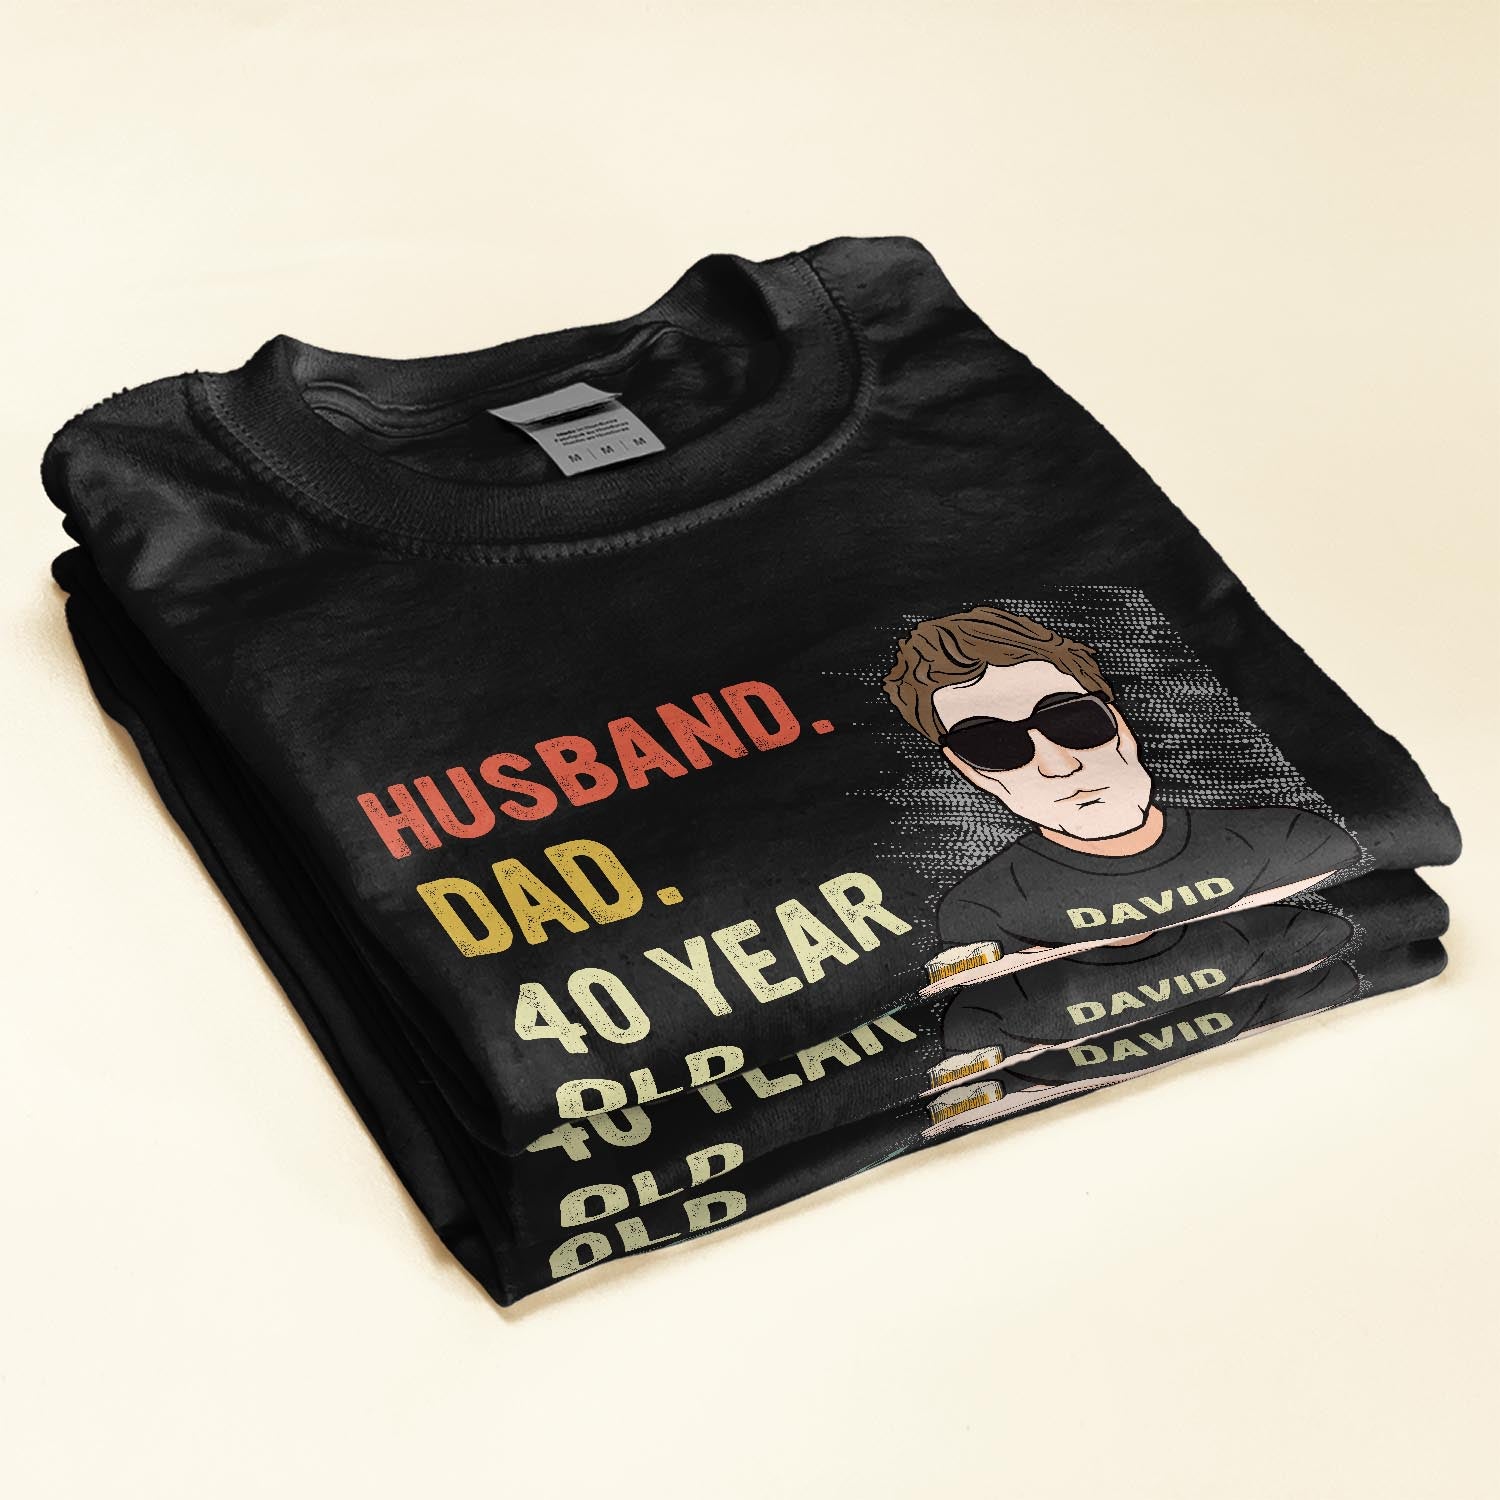 Husband Dad 40 Year Old Legend  - Personalized Shirt - Birthday, Father's Day Gift For Husband, Dad, Father, Papa